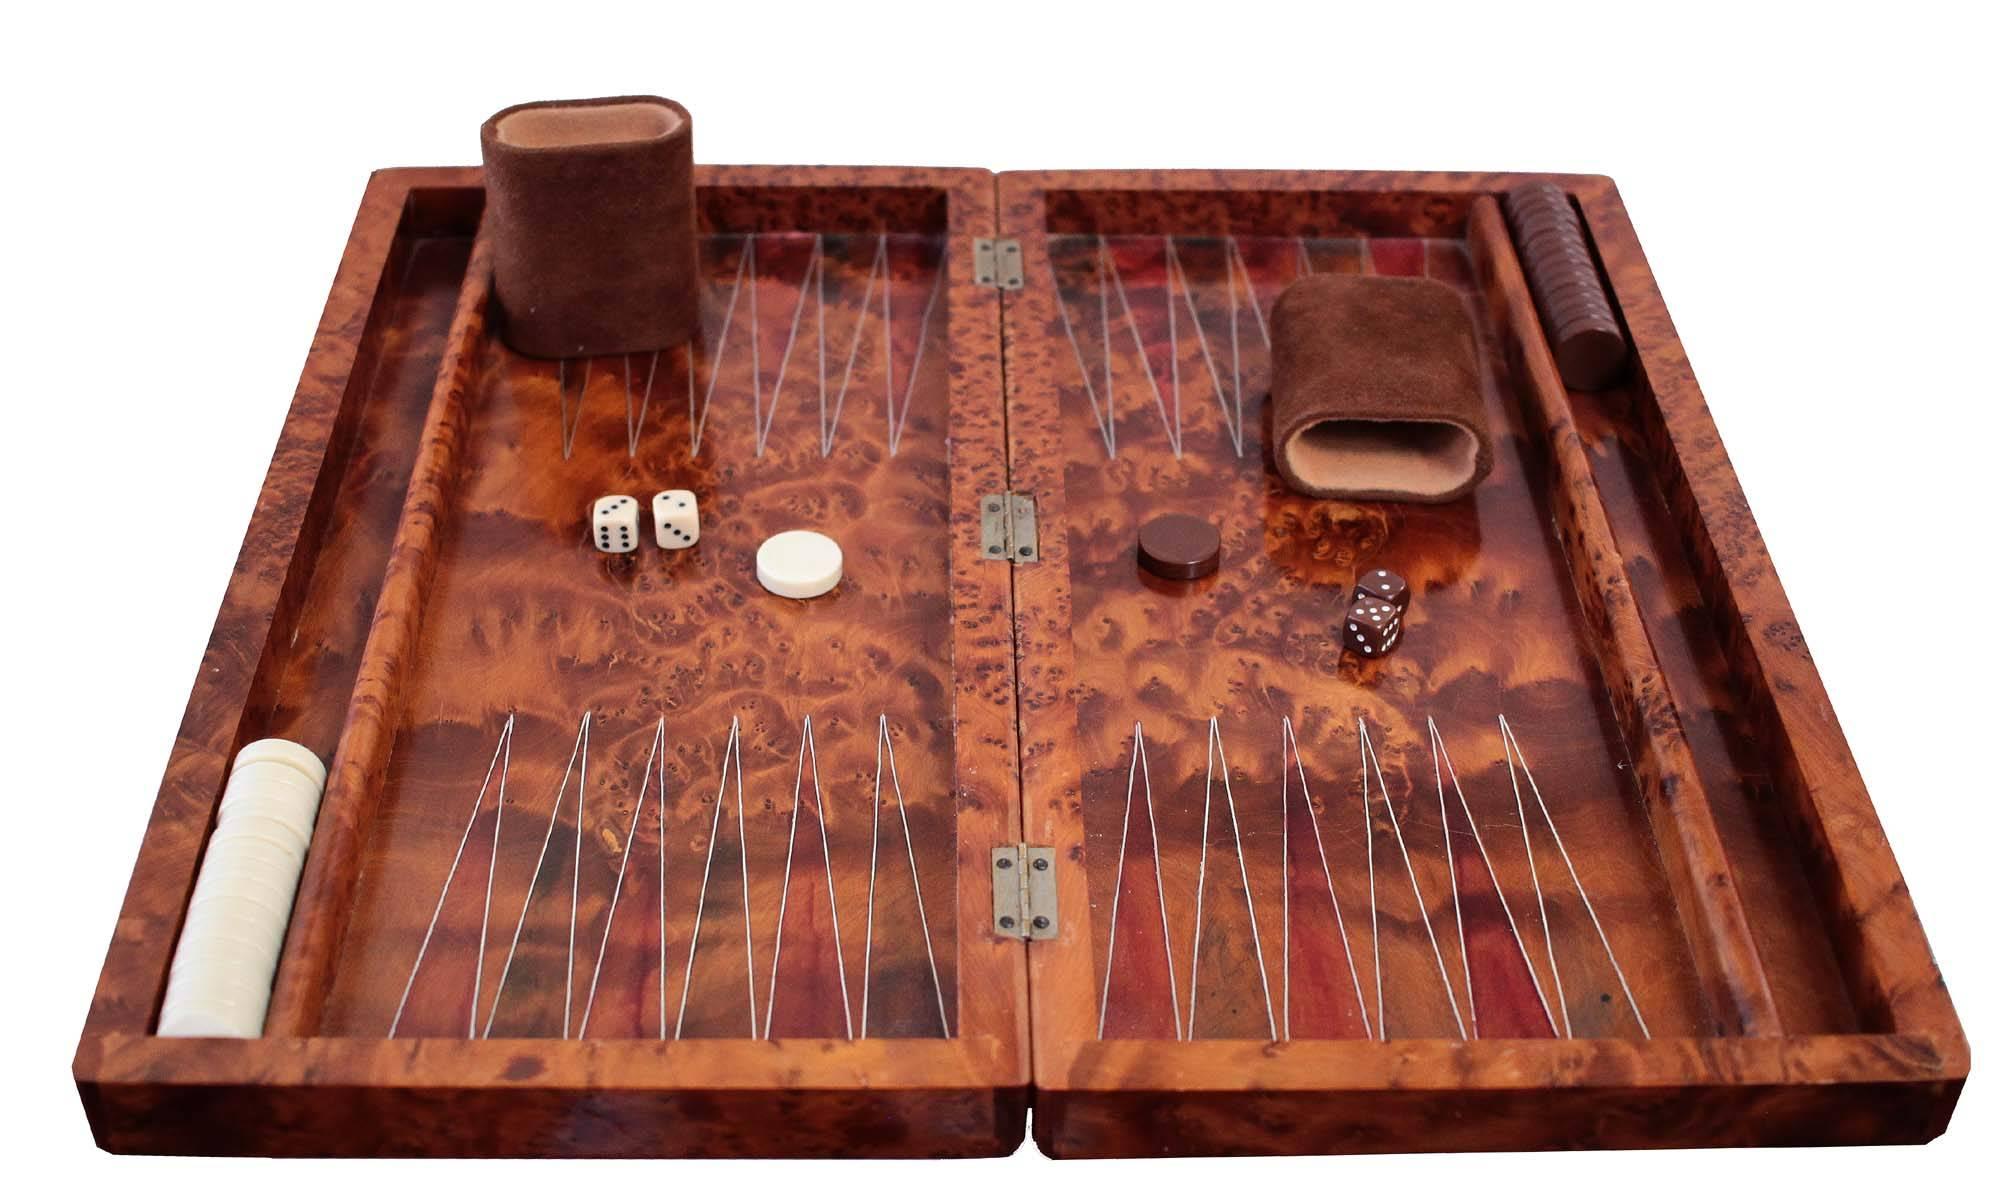 An amazing game board. This is beautiful, amazing the pics speak for themselves. The work that has gone into this game board shows throughout every detail. Backgammon set for the ages.